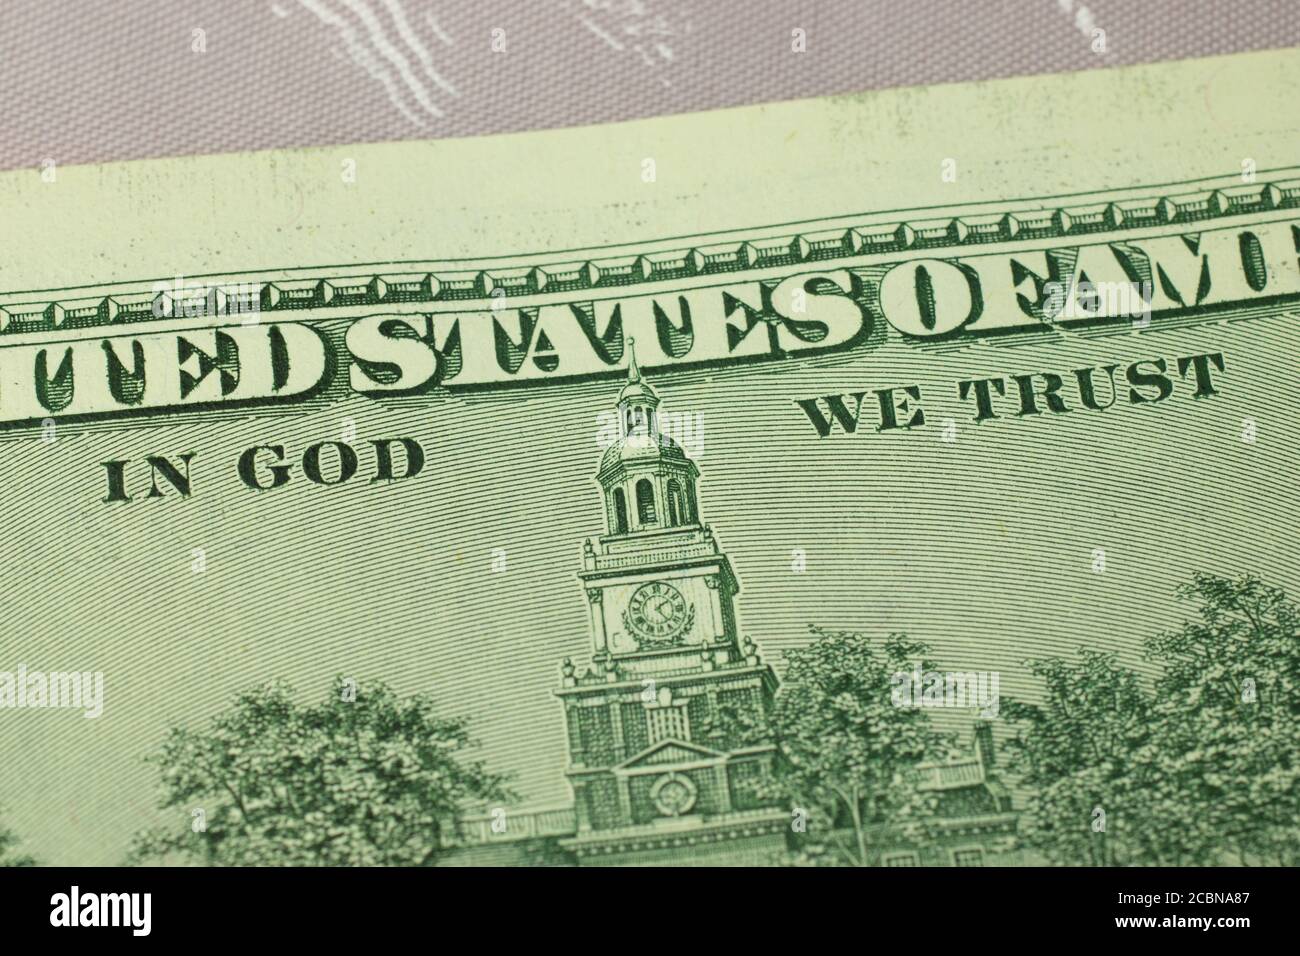 In god we trust on dollar banknote close-up Stock Photo